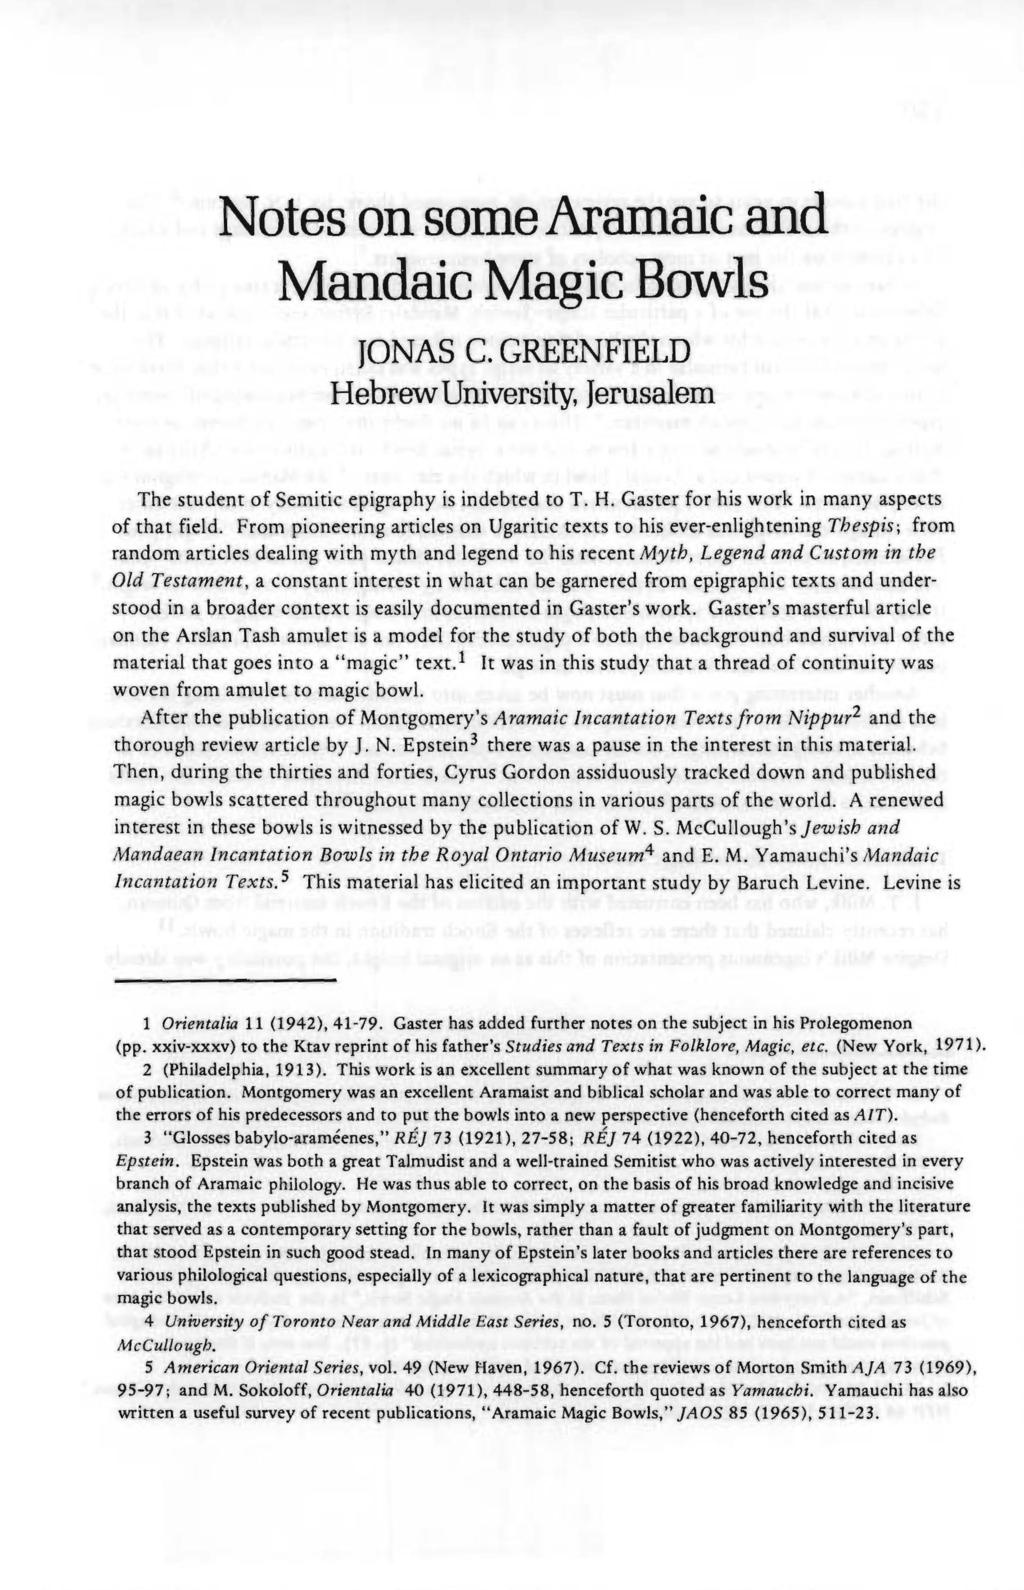 Notes on some Aramaic and Mandaic Magic Bowls JONAS C. GREENFIELD Hebrew University, Jerusalem The student of Semitic epigraphy is indebted to T. H. Gaster for his work in many aspects of that field.